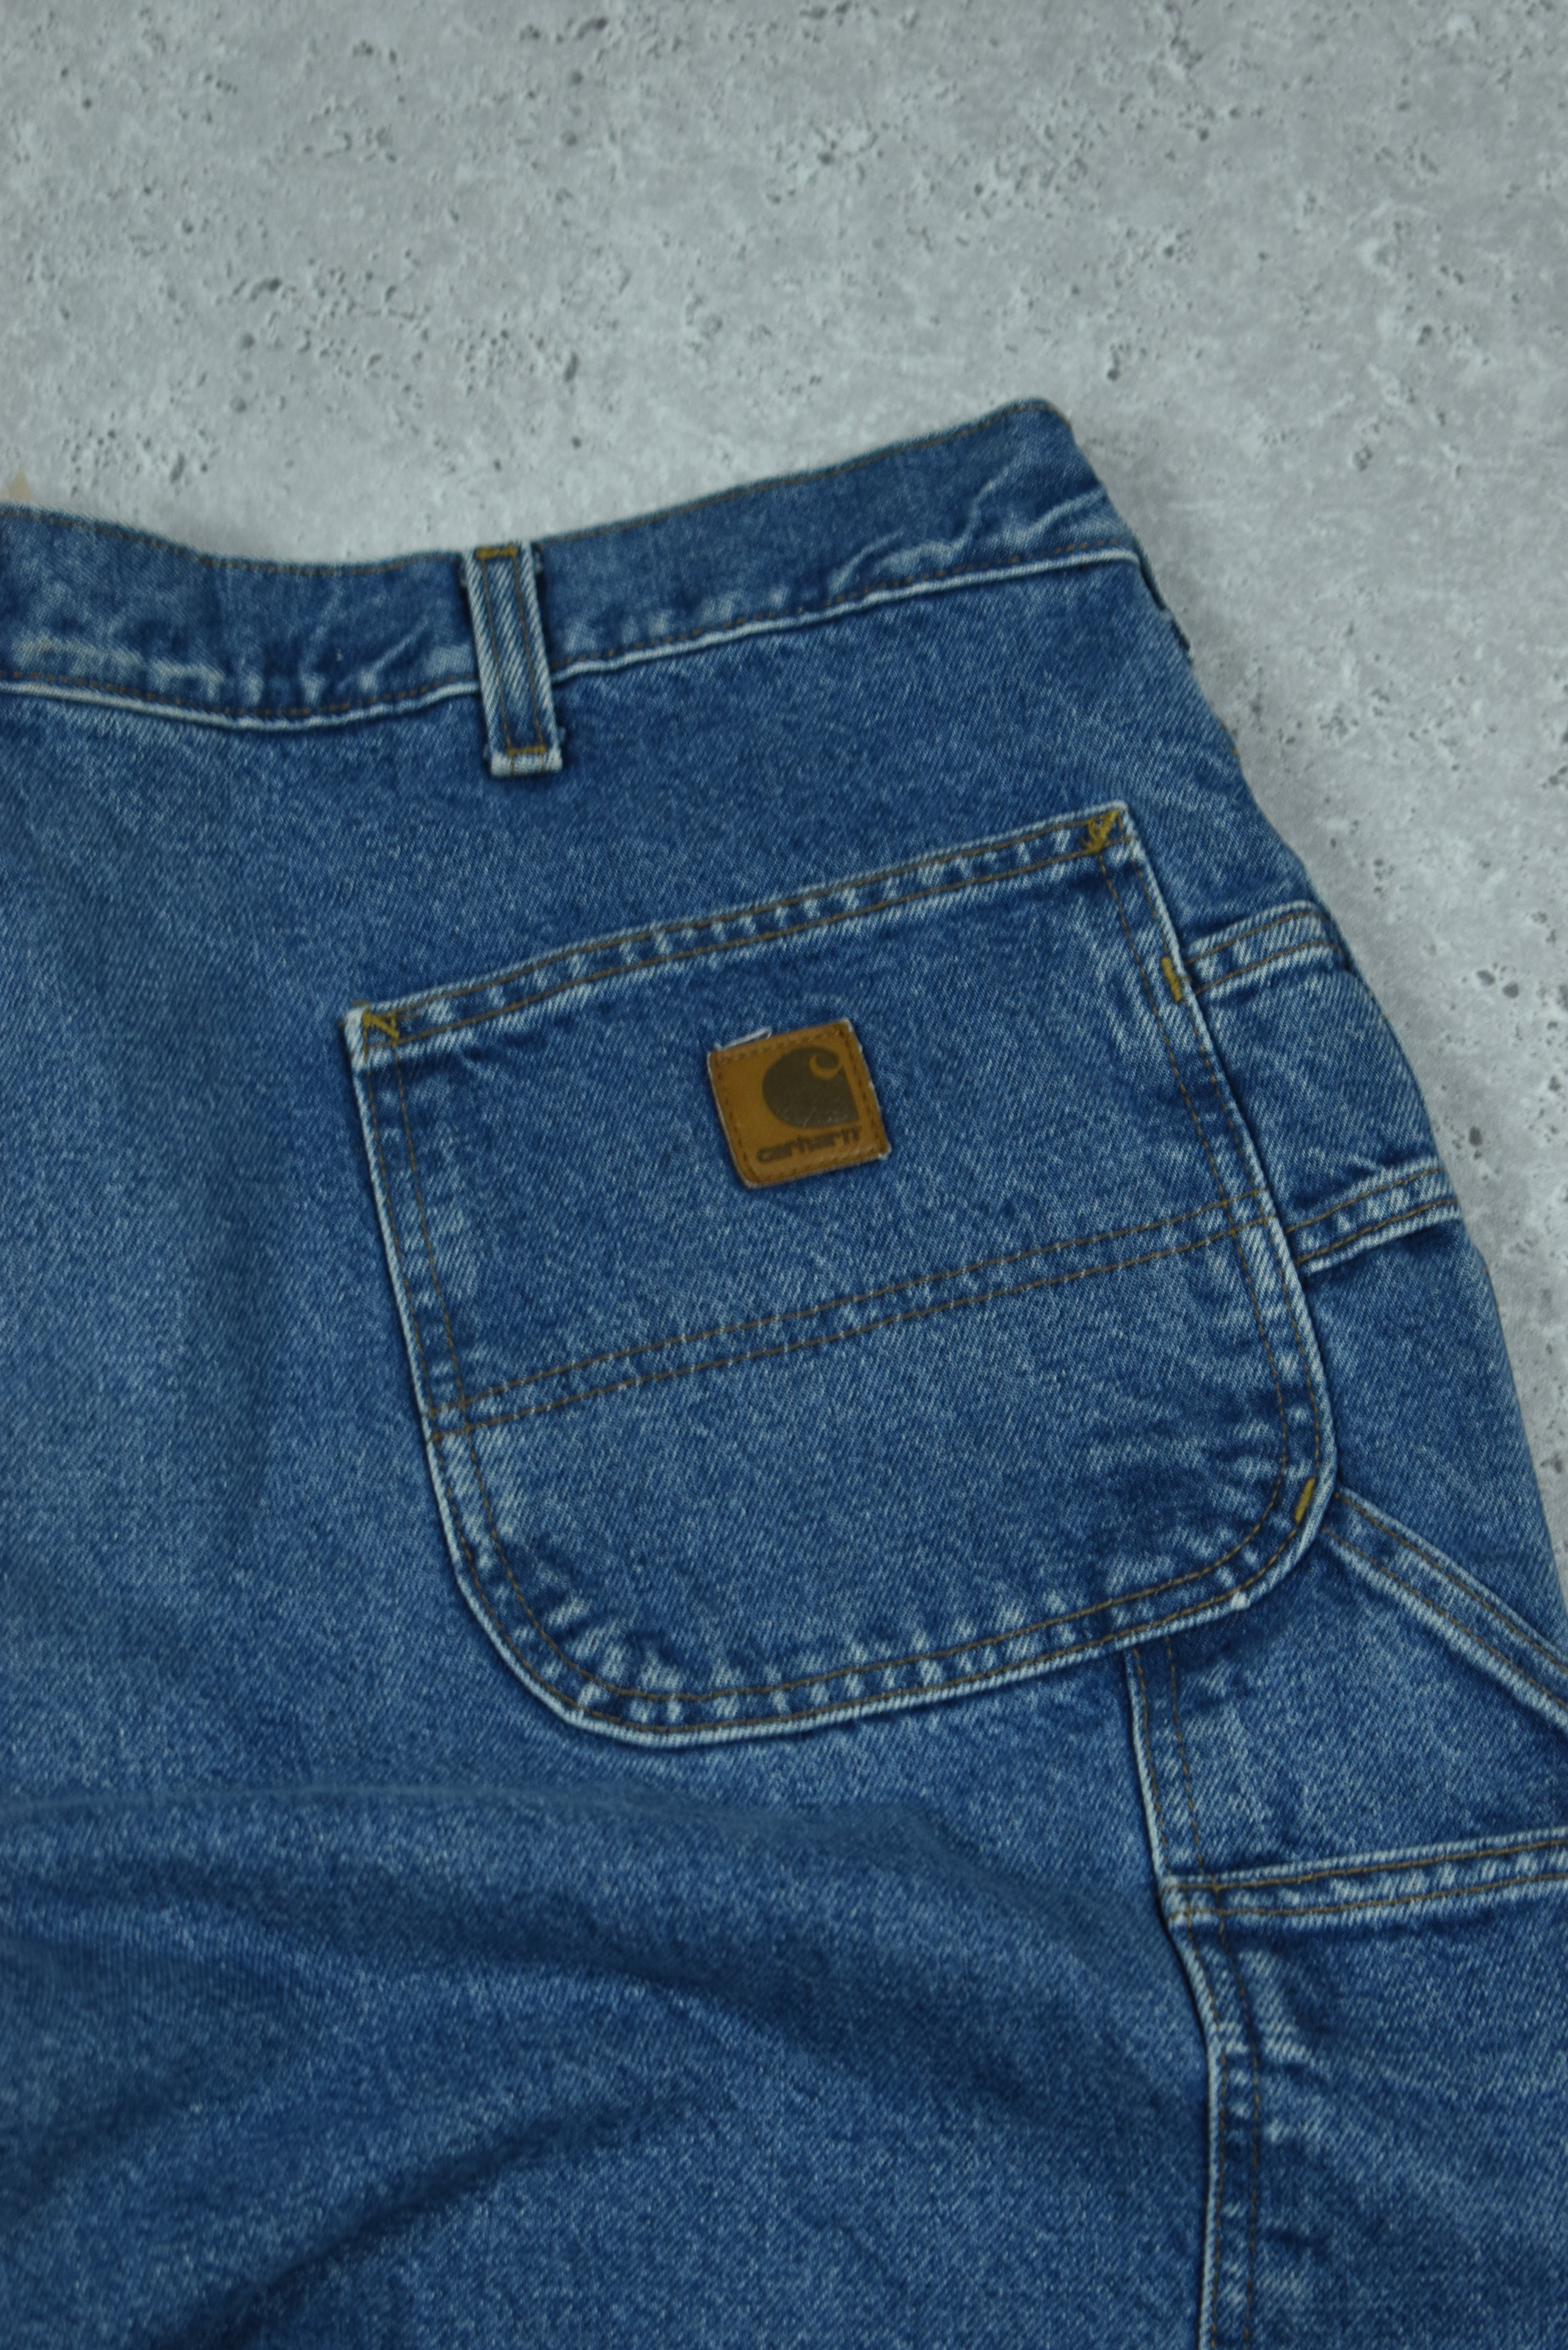 Vintage Carhartt Dungarees Double Lined Jeans 40x30